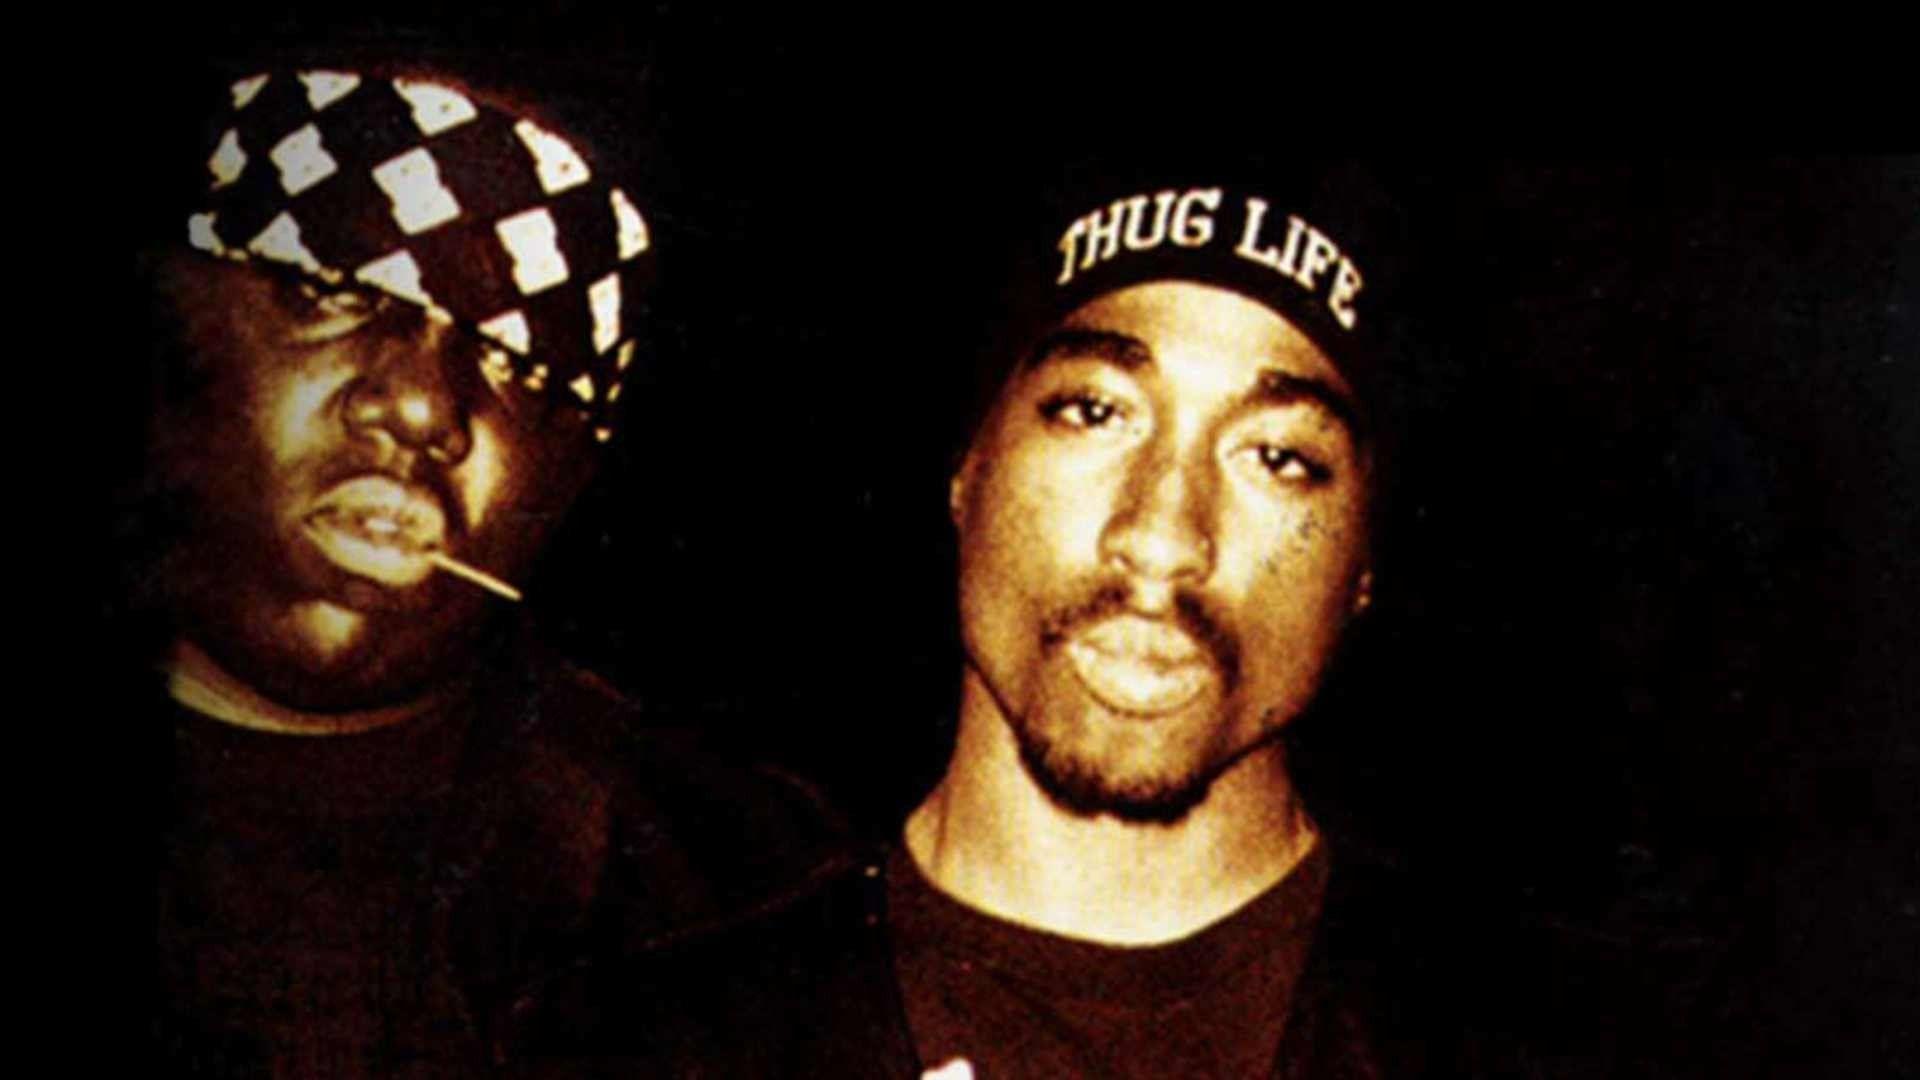 Tupac Shakur, who was shot and killed in Las Vegas in 1996, is pictured with Notorious B.I.G. in a scene from the documentary 